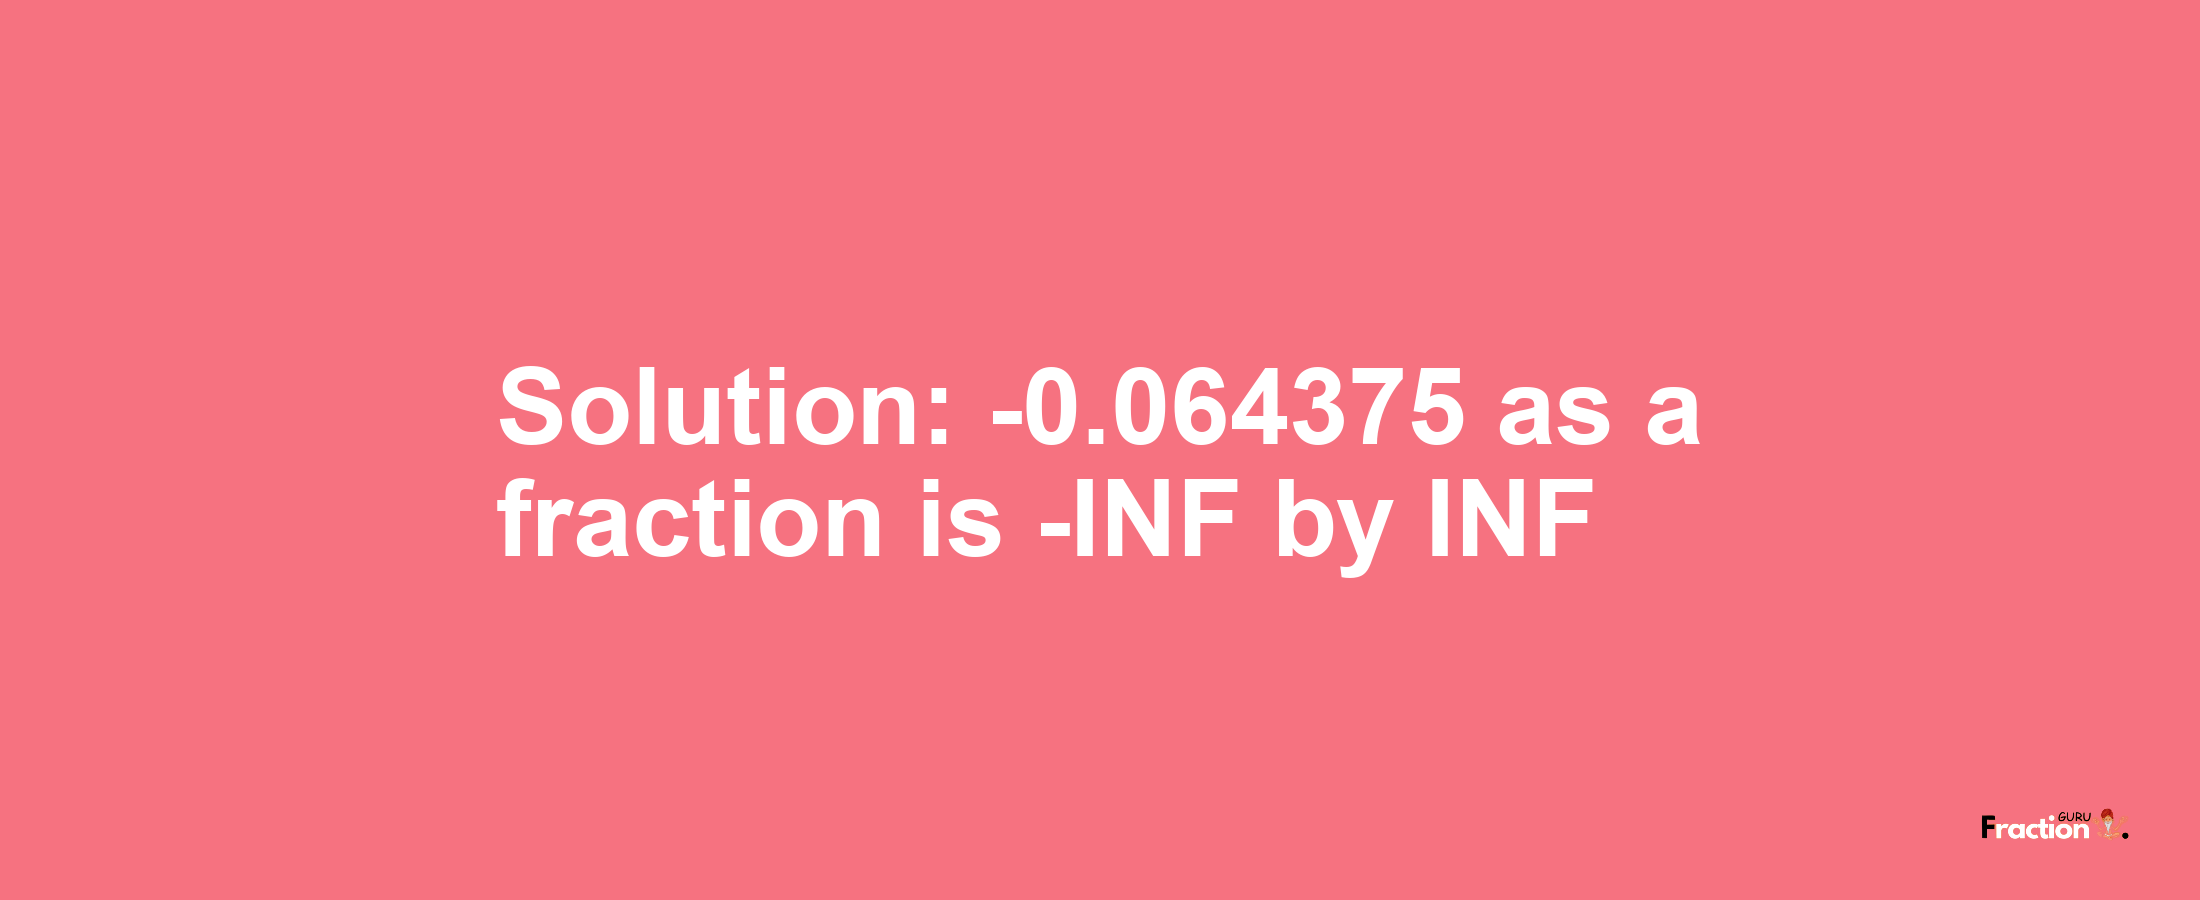 Solution:-0.064375 as a fraction is -INF/INF